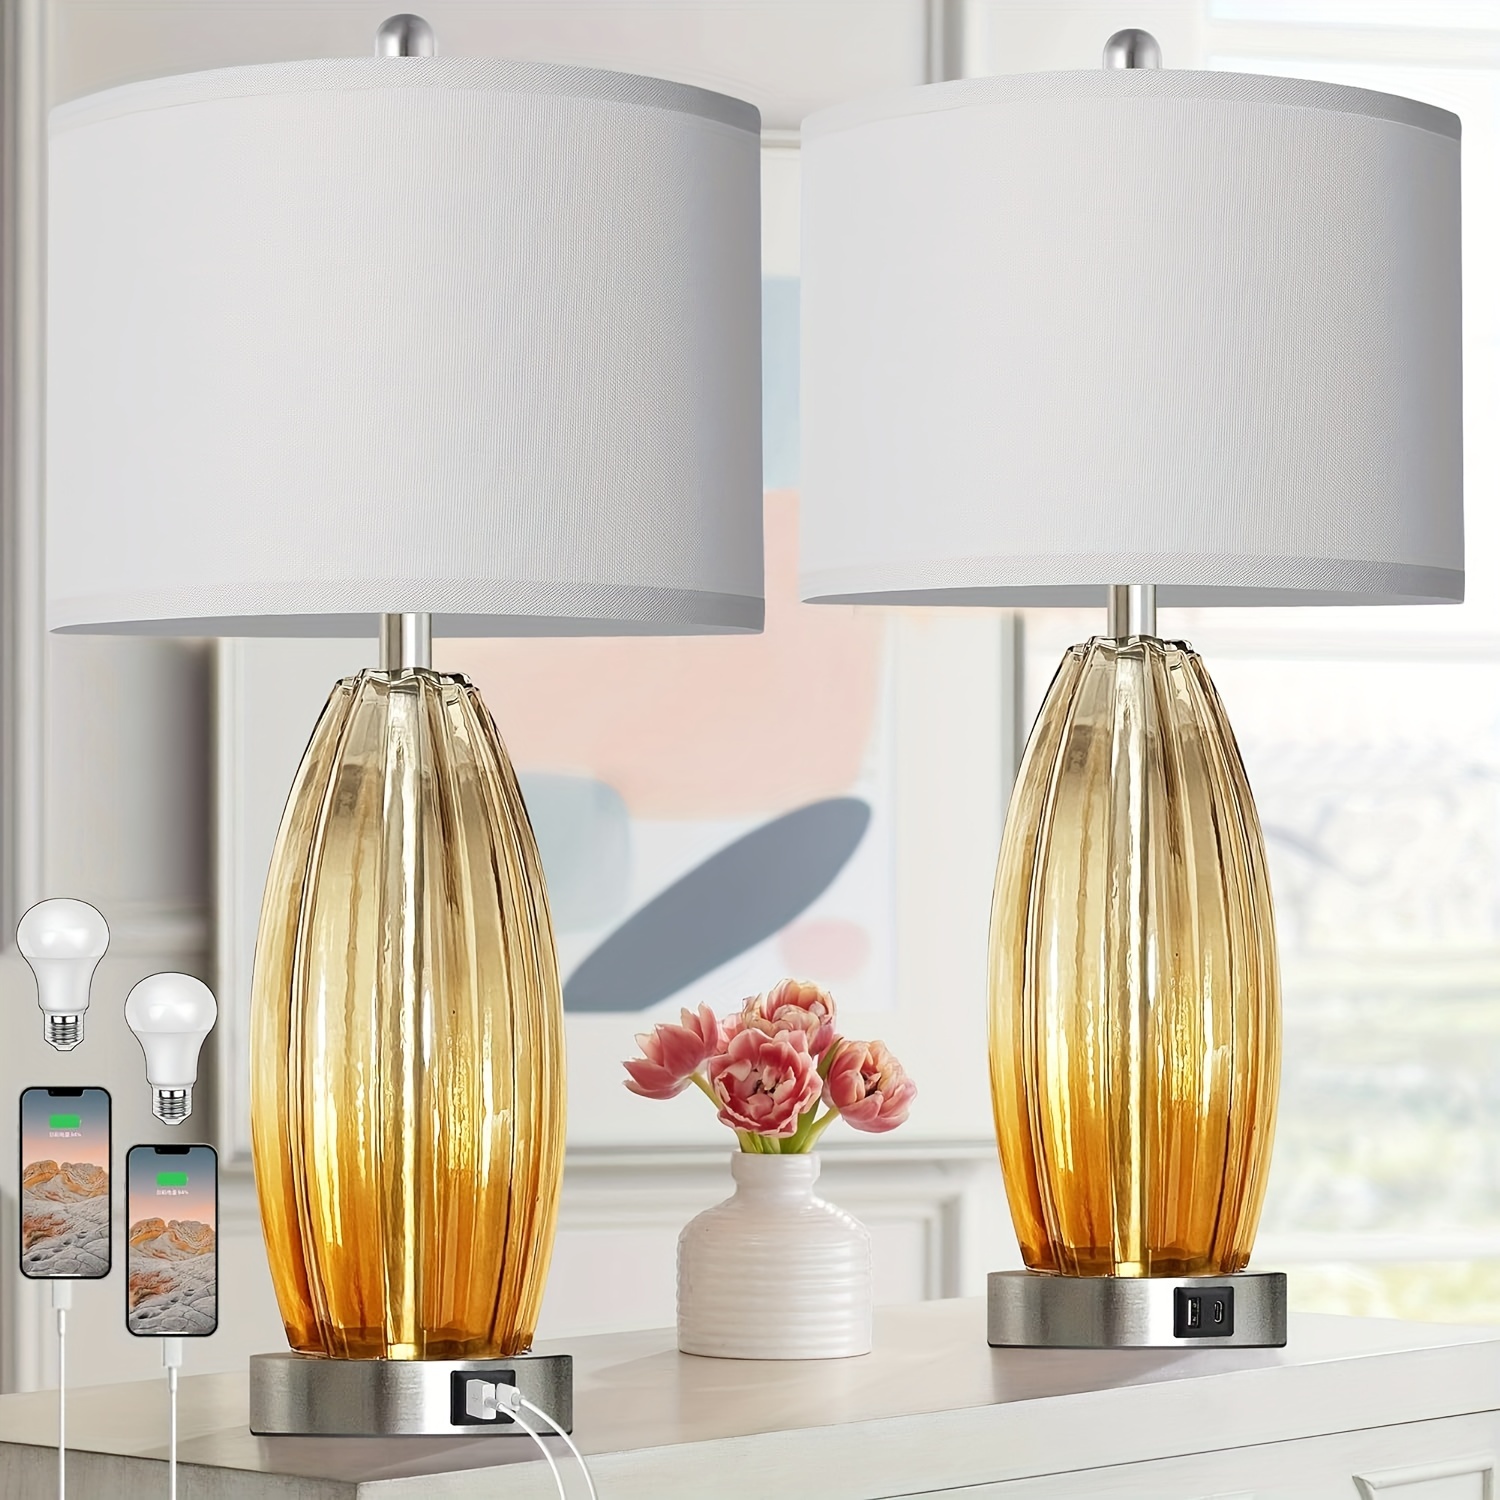 

Table Lamps For Living Room Set Of 2, Champagne Glass Bedside Table Lamp For Bedroom With Usb C+a Ports, Contemporary Coastal Style Side Nightstand Lamps With 2 Led Bulbs For End Tables